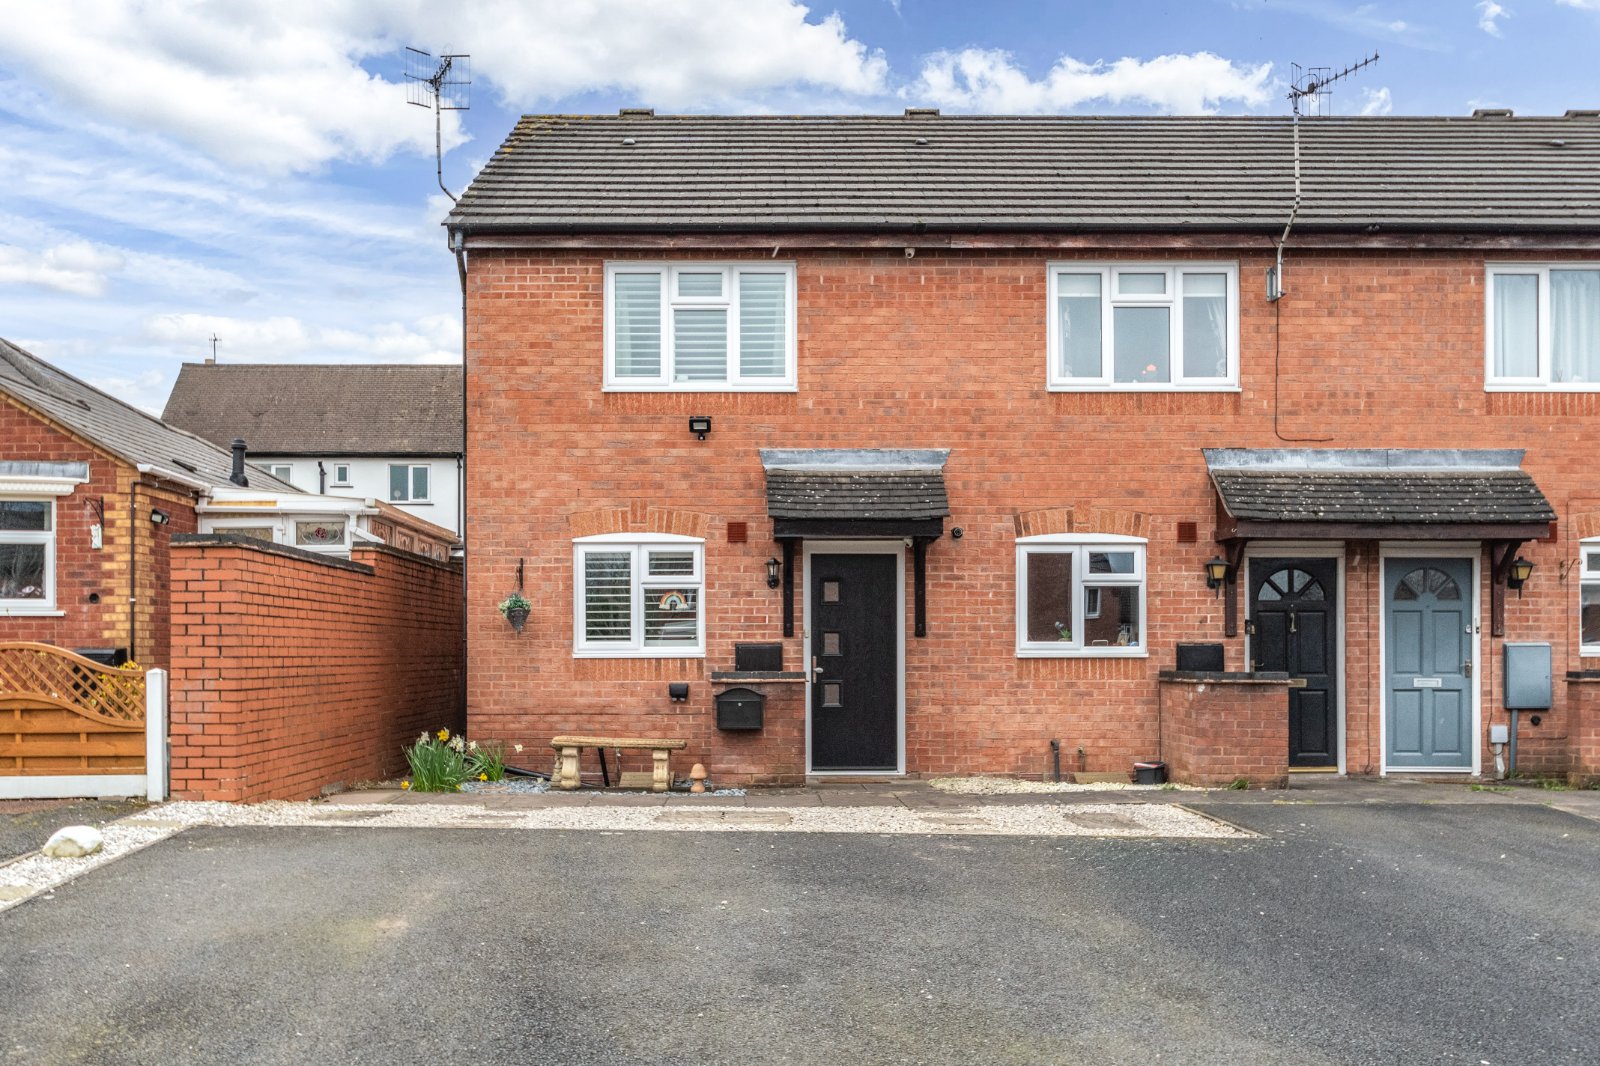 2 bed house for sale in Acorn Road, Catshill  - Property Image 1